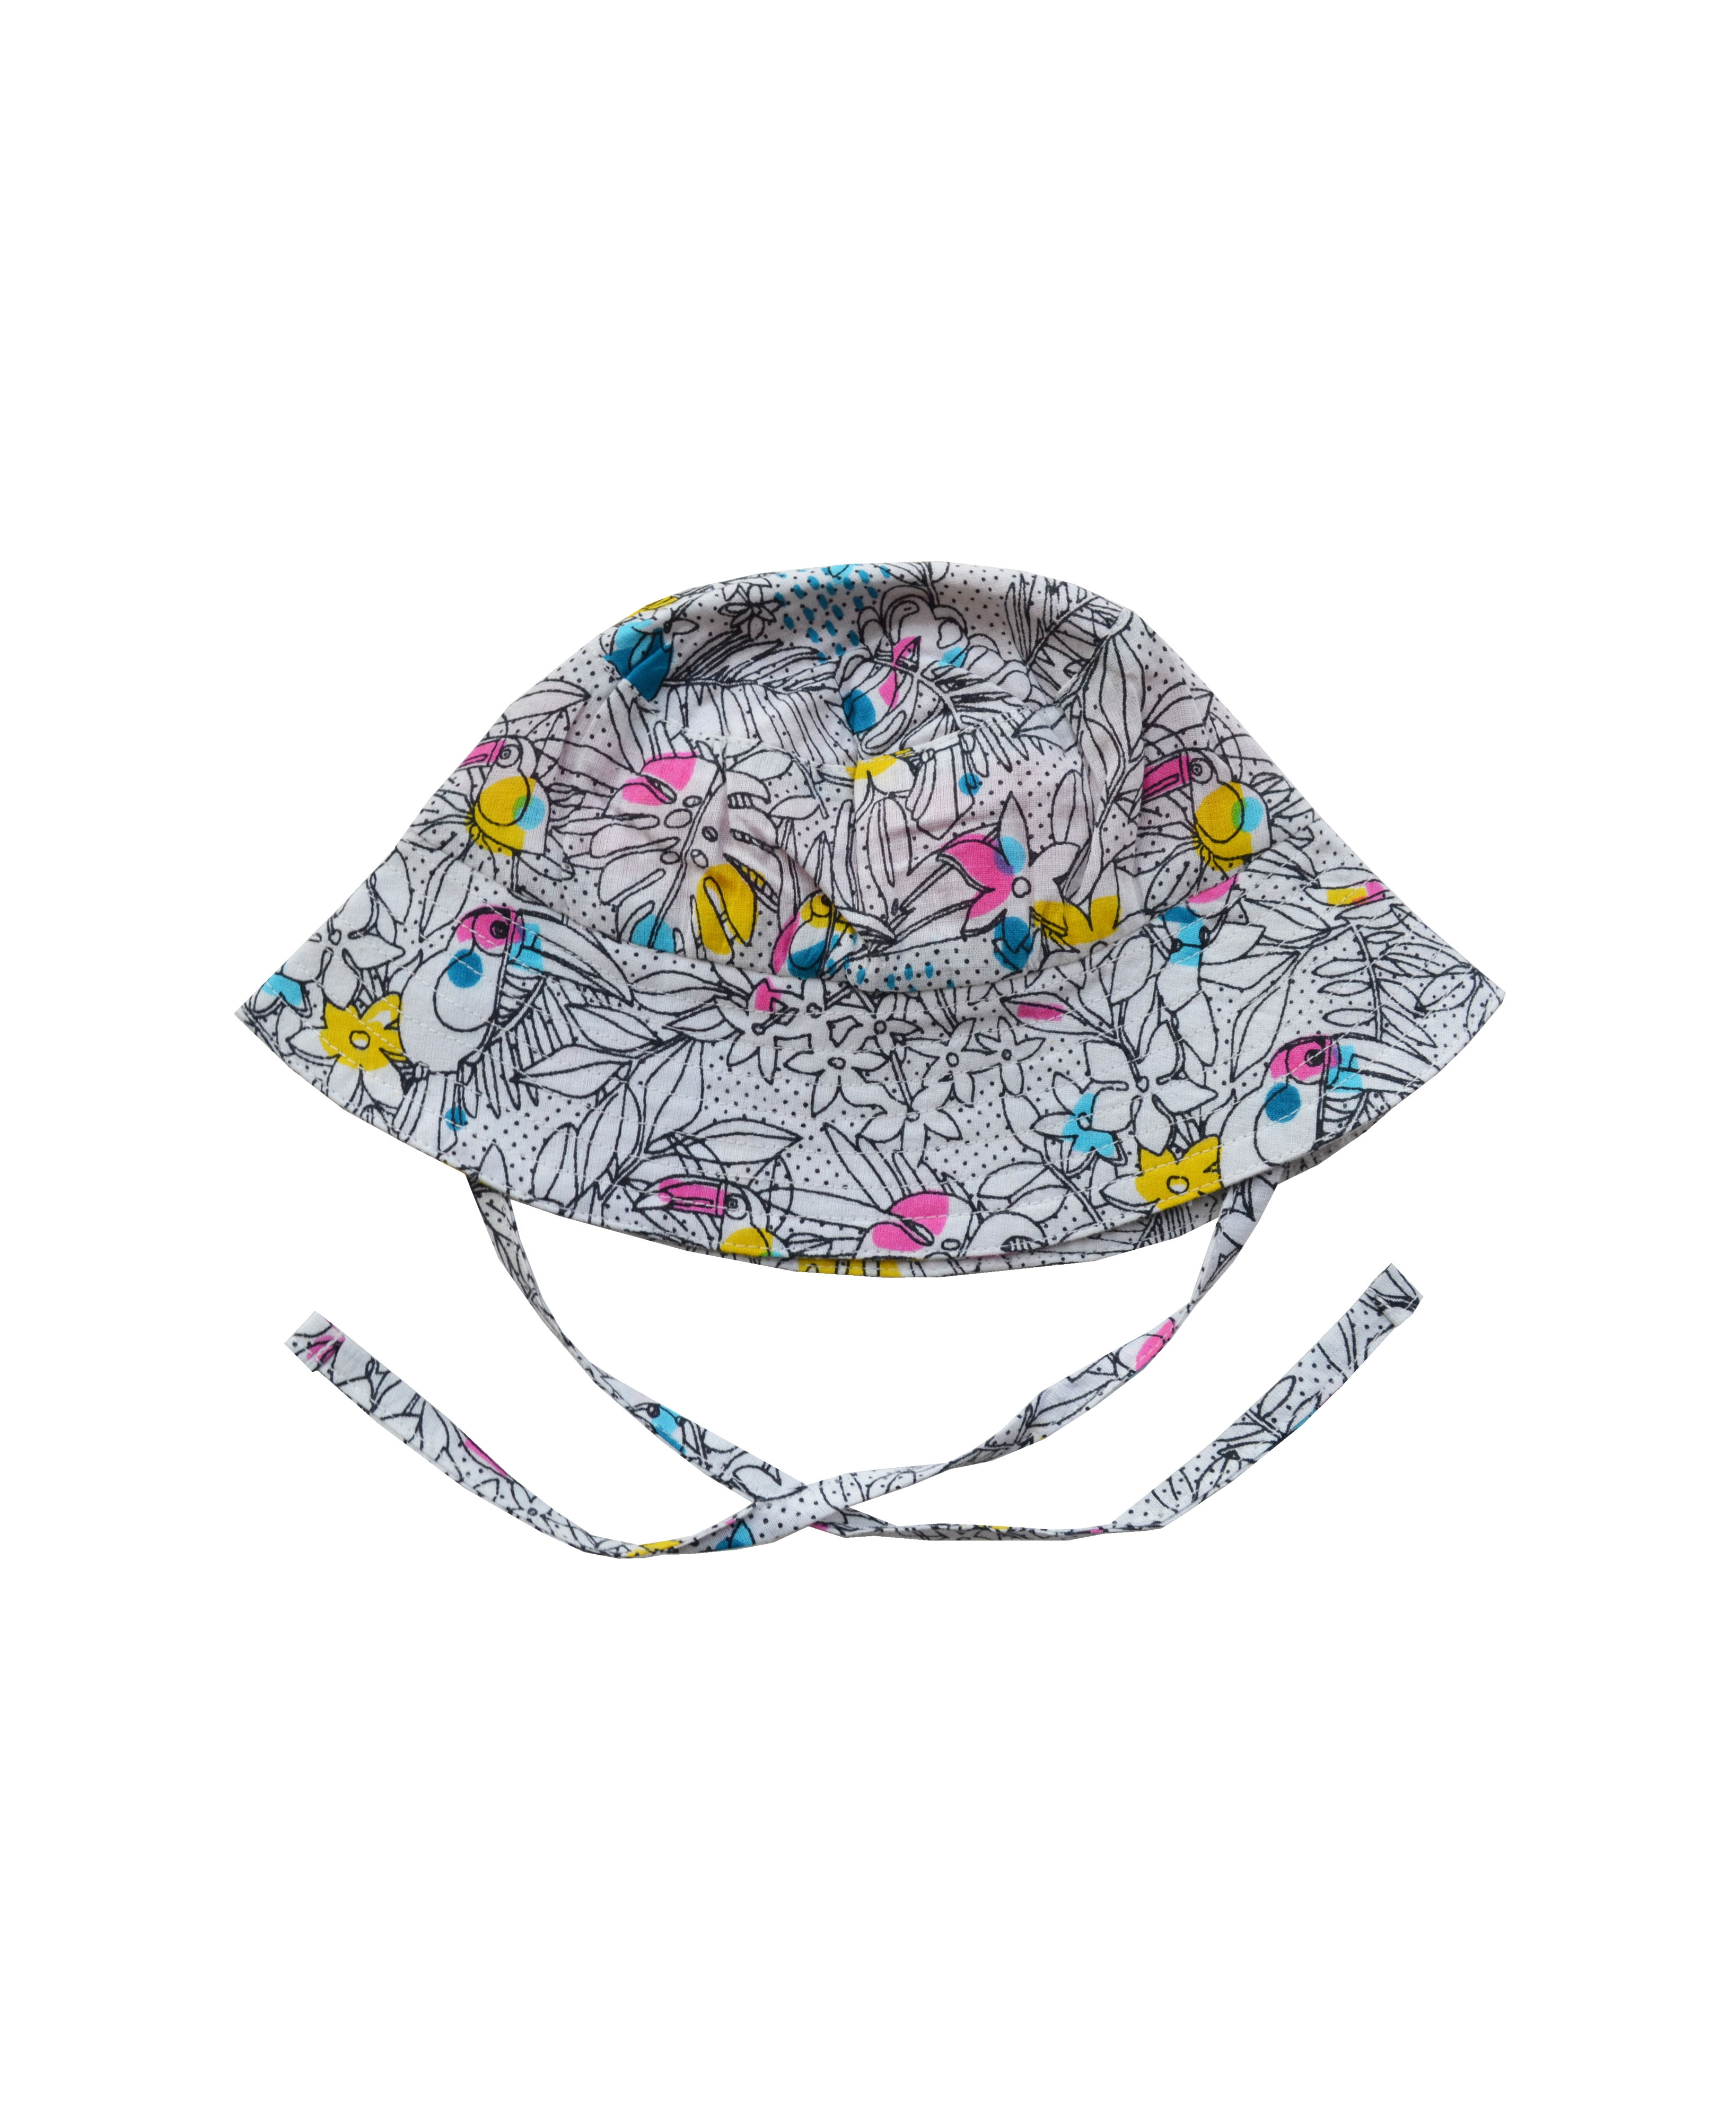 Babeez | White Sunhat with flower and dot print (100% Cotton) undefined